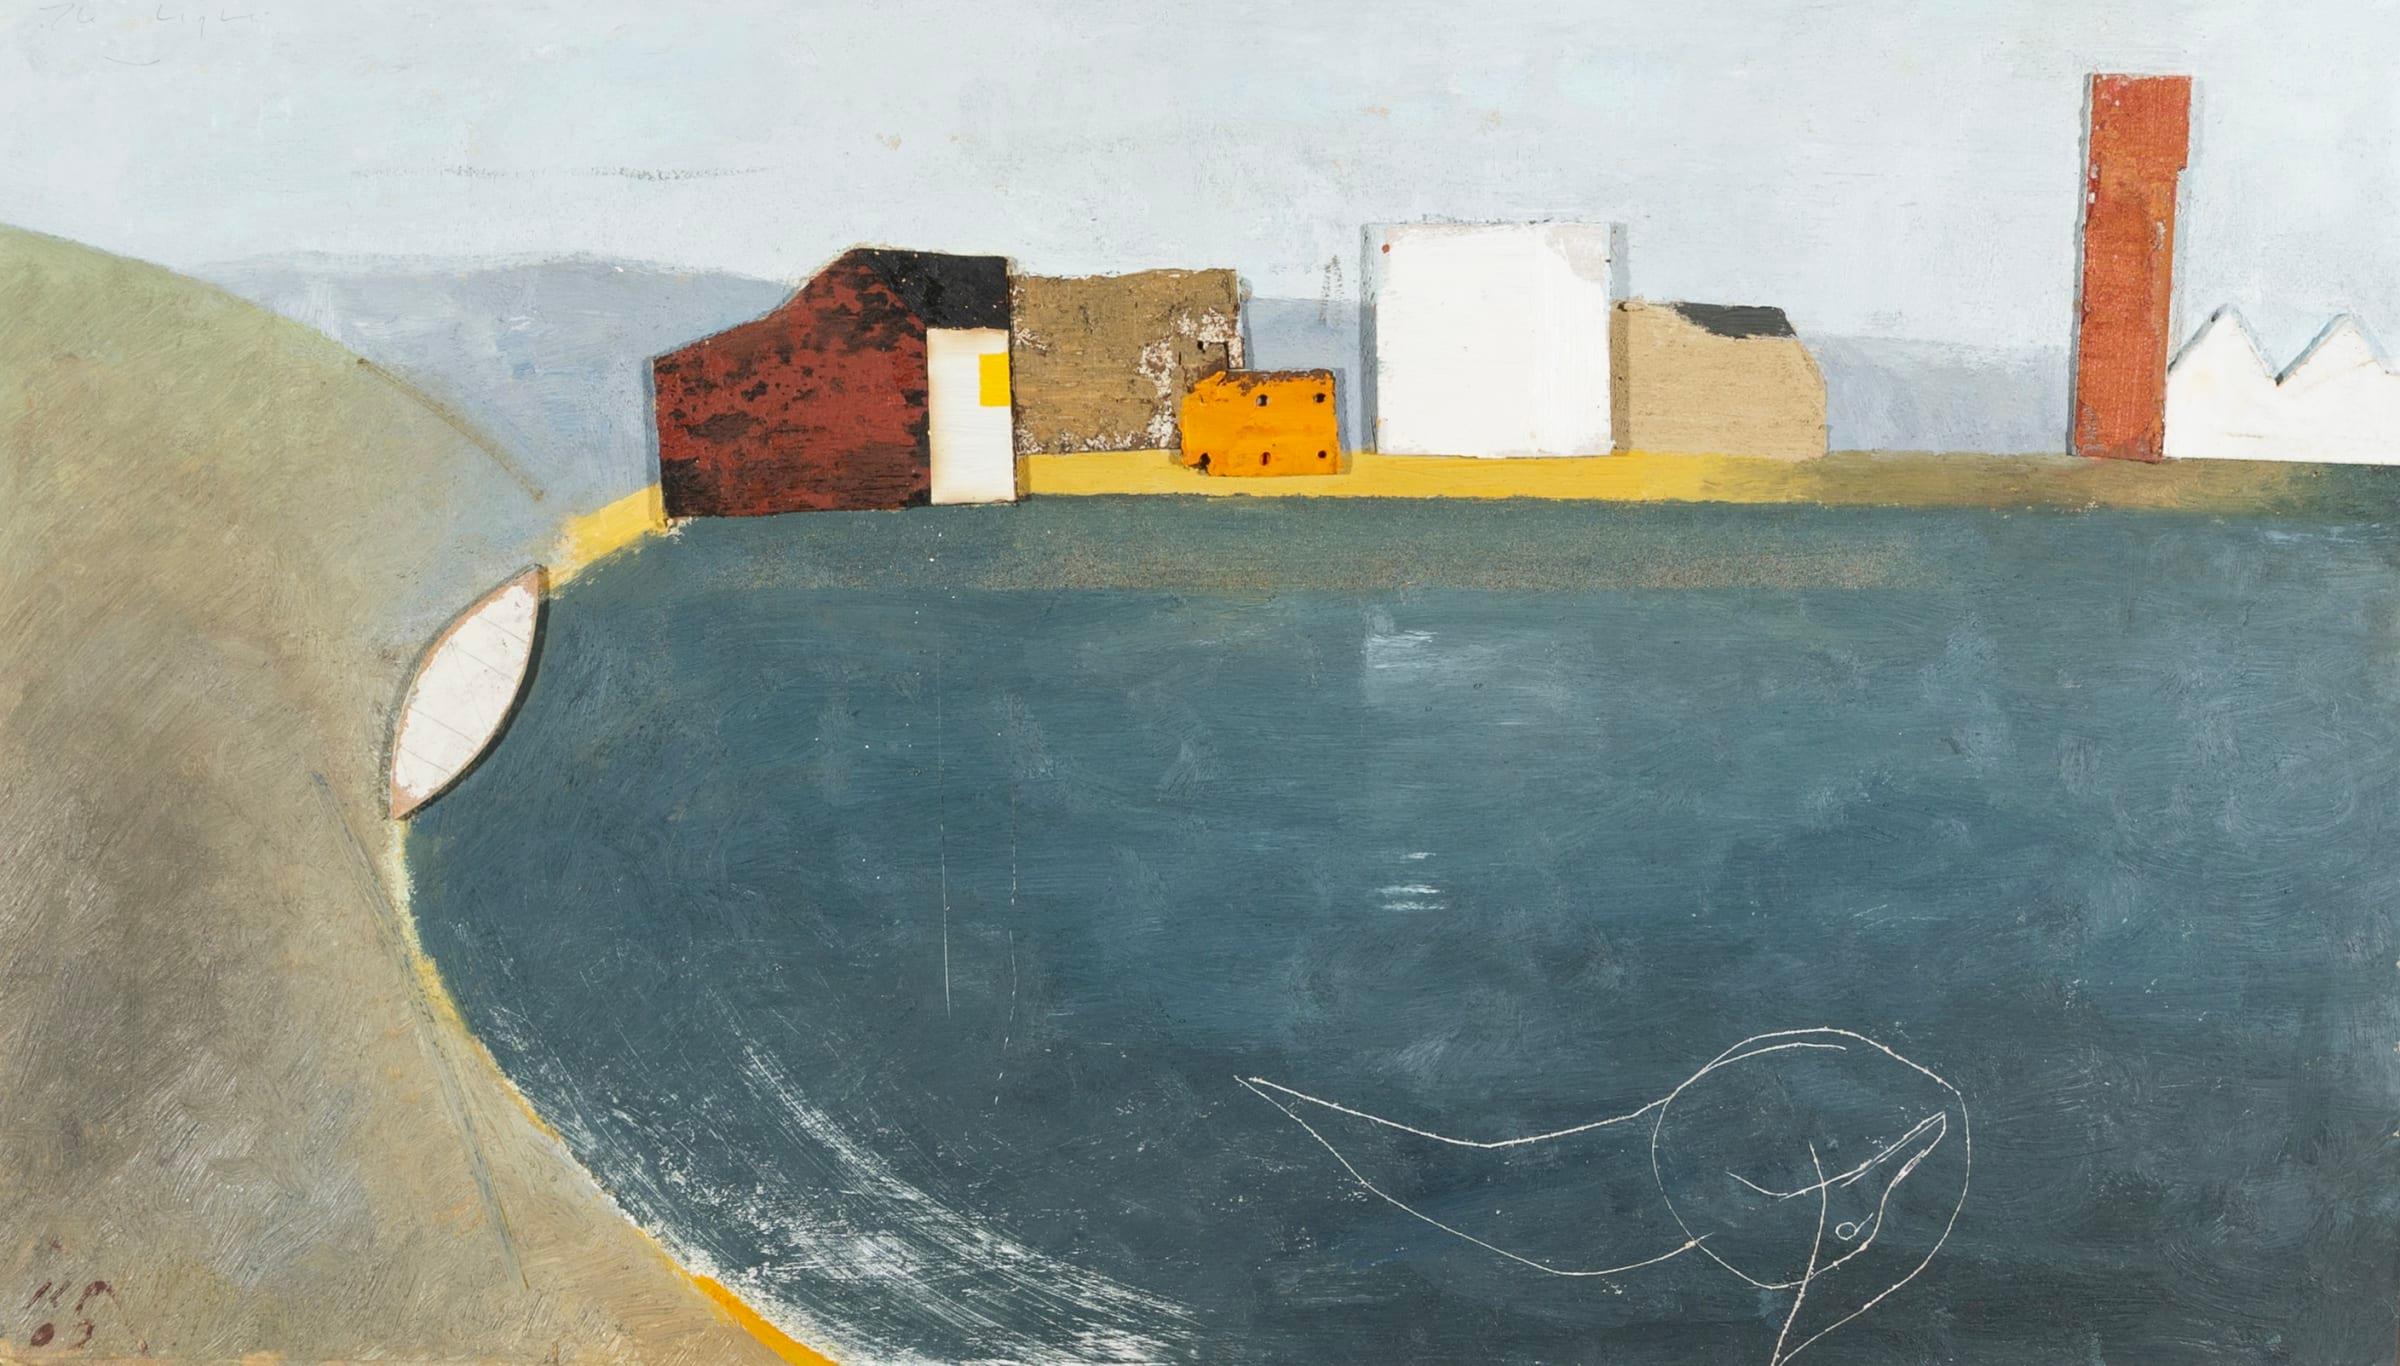 The Light, Oil on Board Painting by Keith Purser B. 1944, 2003

Additional information:
Medium: Oil, sand and found objects on board
Dimensions: 46.5 x 81 cm
18 1/4 x 31 7/8 in
Signed with initials, dated and titled

Keith Purser lives and works on